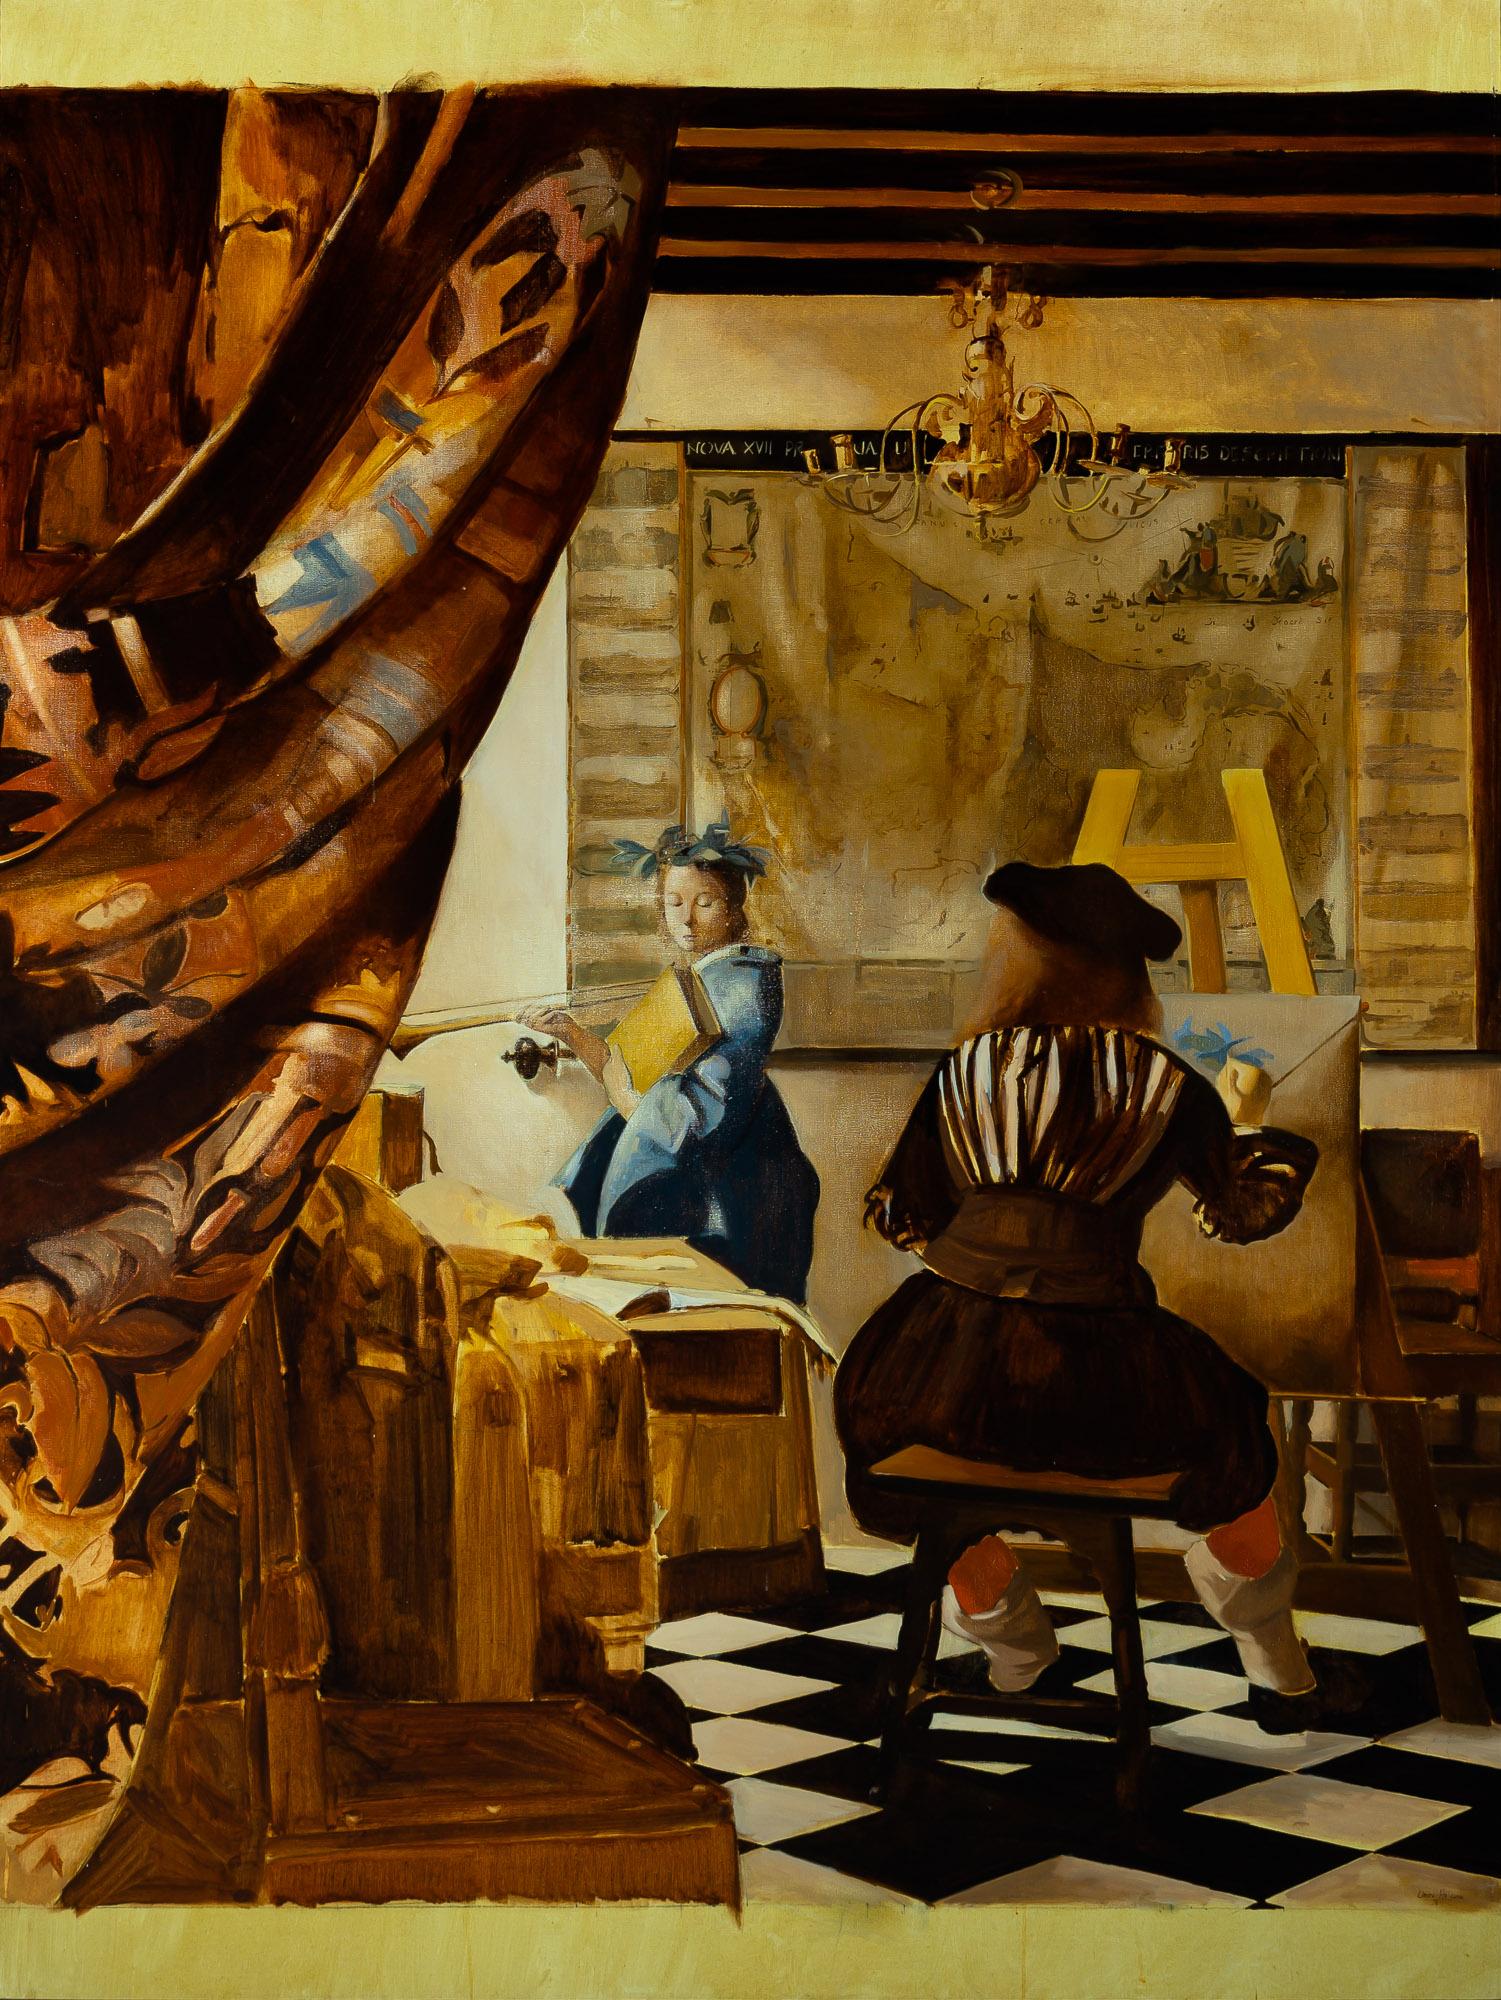 Santiago Uribe Holguin. Colombian, b. 1957
El Gran Vermeer, 1996-97. Signed and dated Uribe-Holguin '96 (lr), Signed and dated Uribe-Holguin 97 and inscribed as titled on the reverse. Oil on canvas.
Dimensions with out frame: 80 x 59 inches (203.2 x